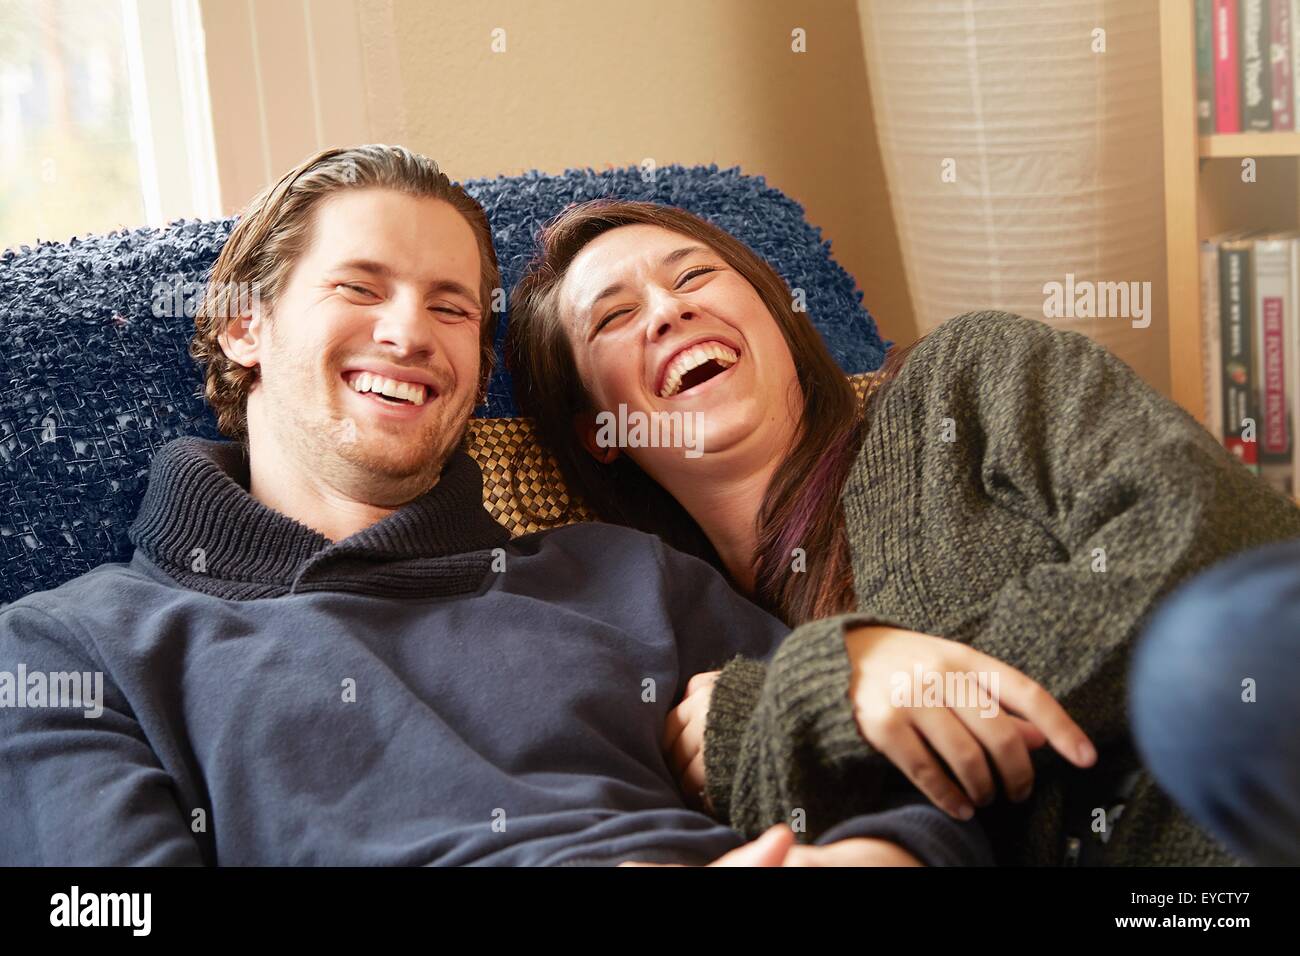 Young couple laughing on living room sofa Stock Photo